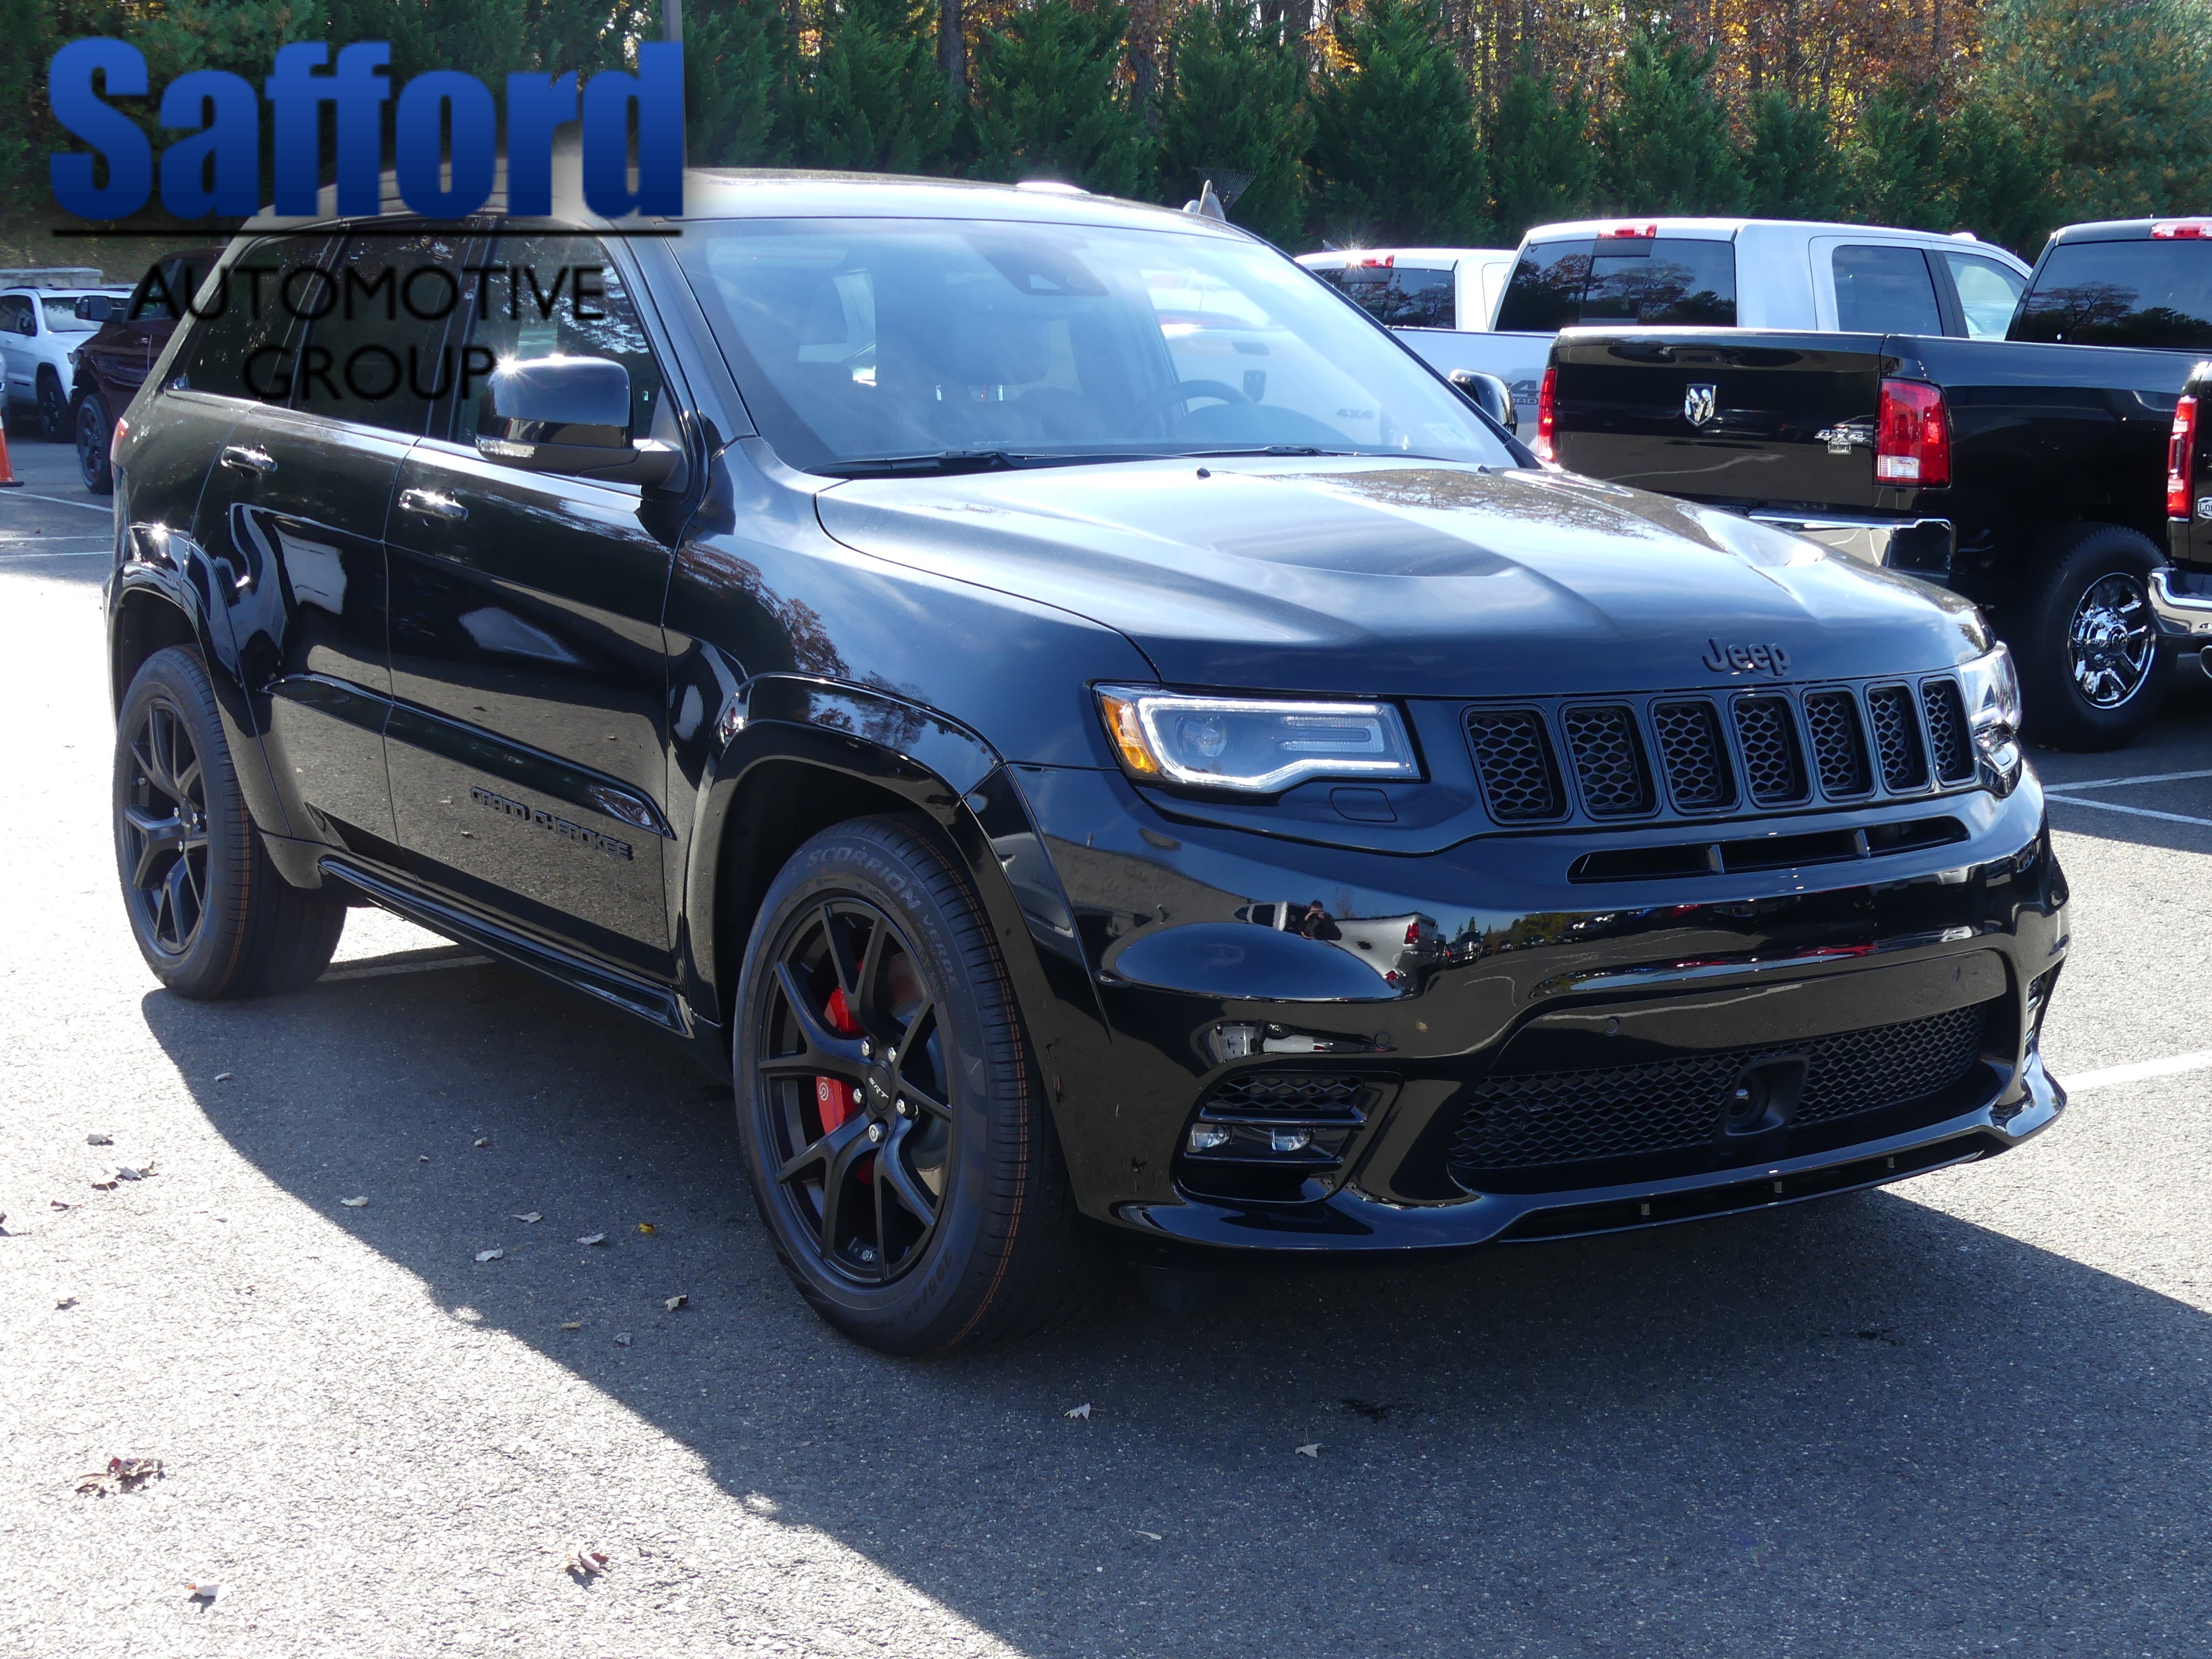 New 2019 JEEP Grand Cherokee SRT Sport Utility in Springfield #KC594036 | Safford CJDR of Best Tires For 2019 Jeep Grand Cherokee